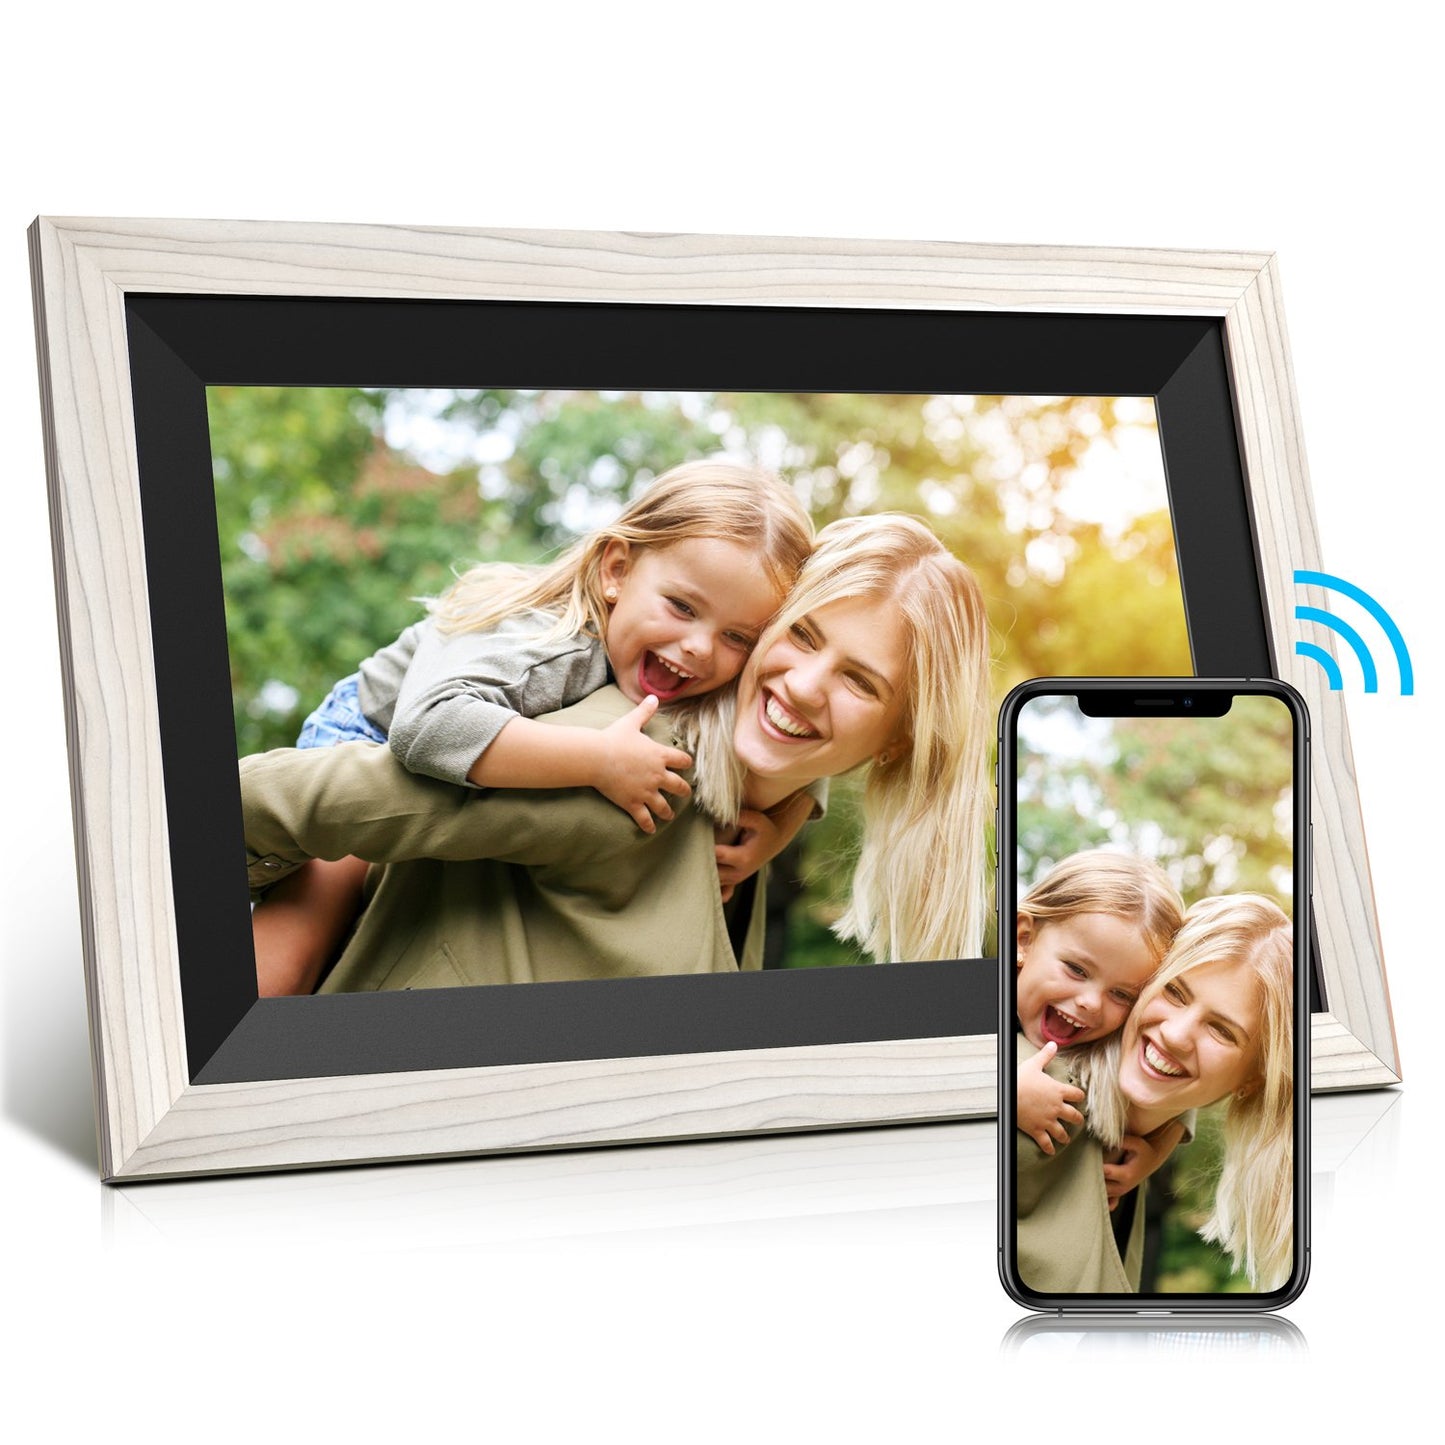 Jeemak F20A Digital Picture Frame -  WiFi, HD and touch screen - 10.1 Inch